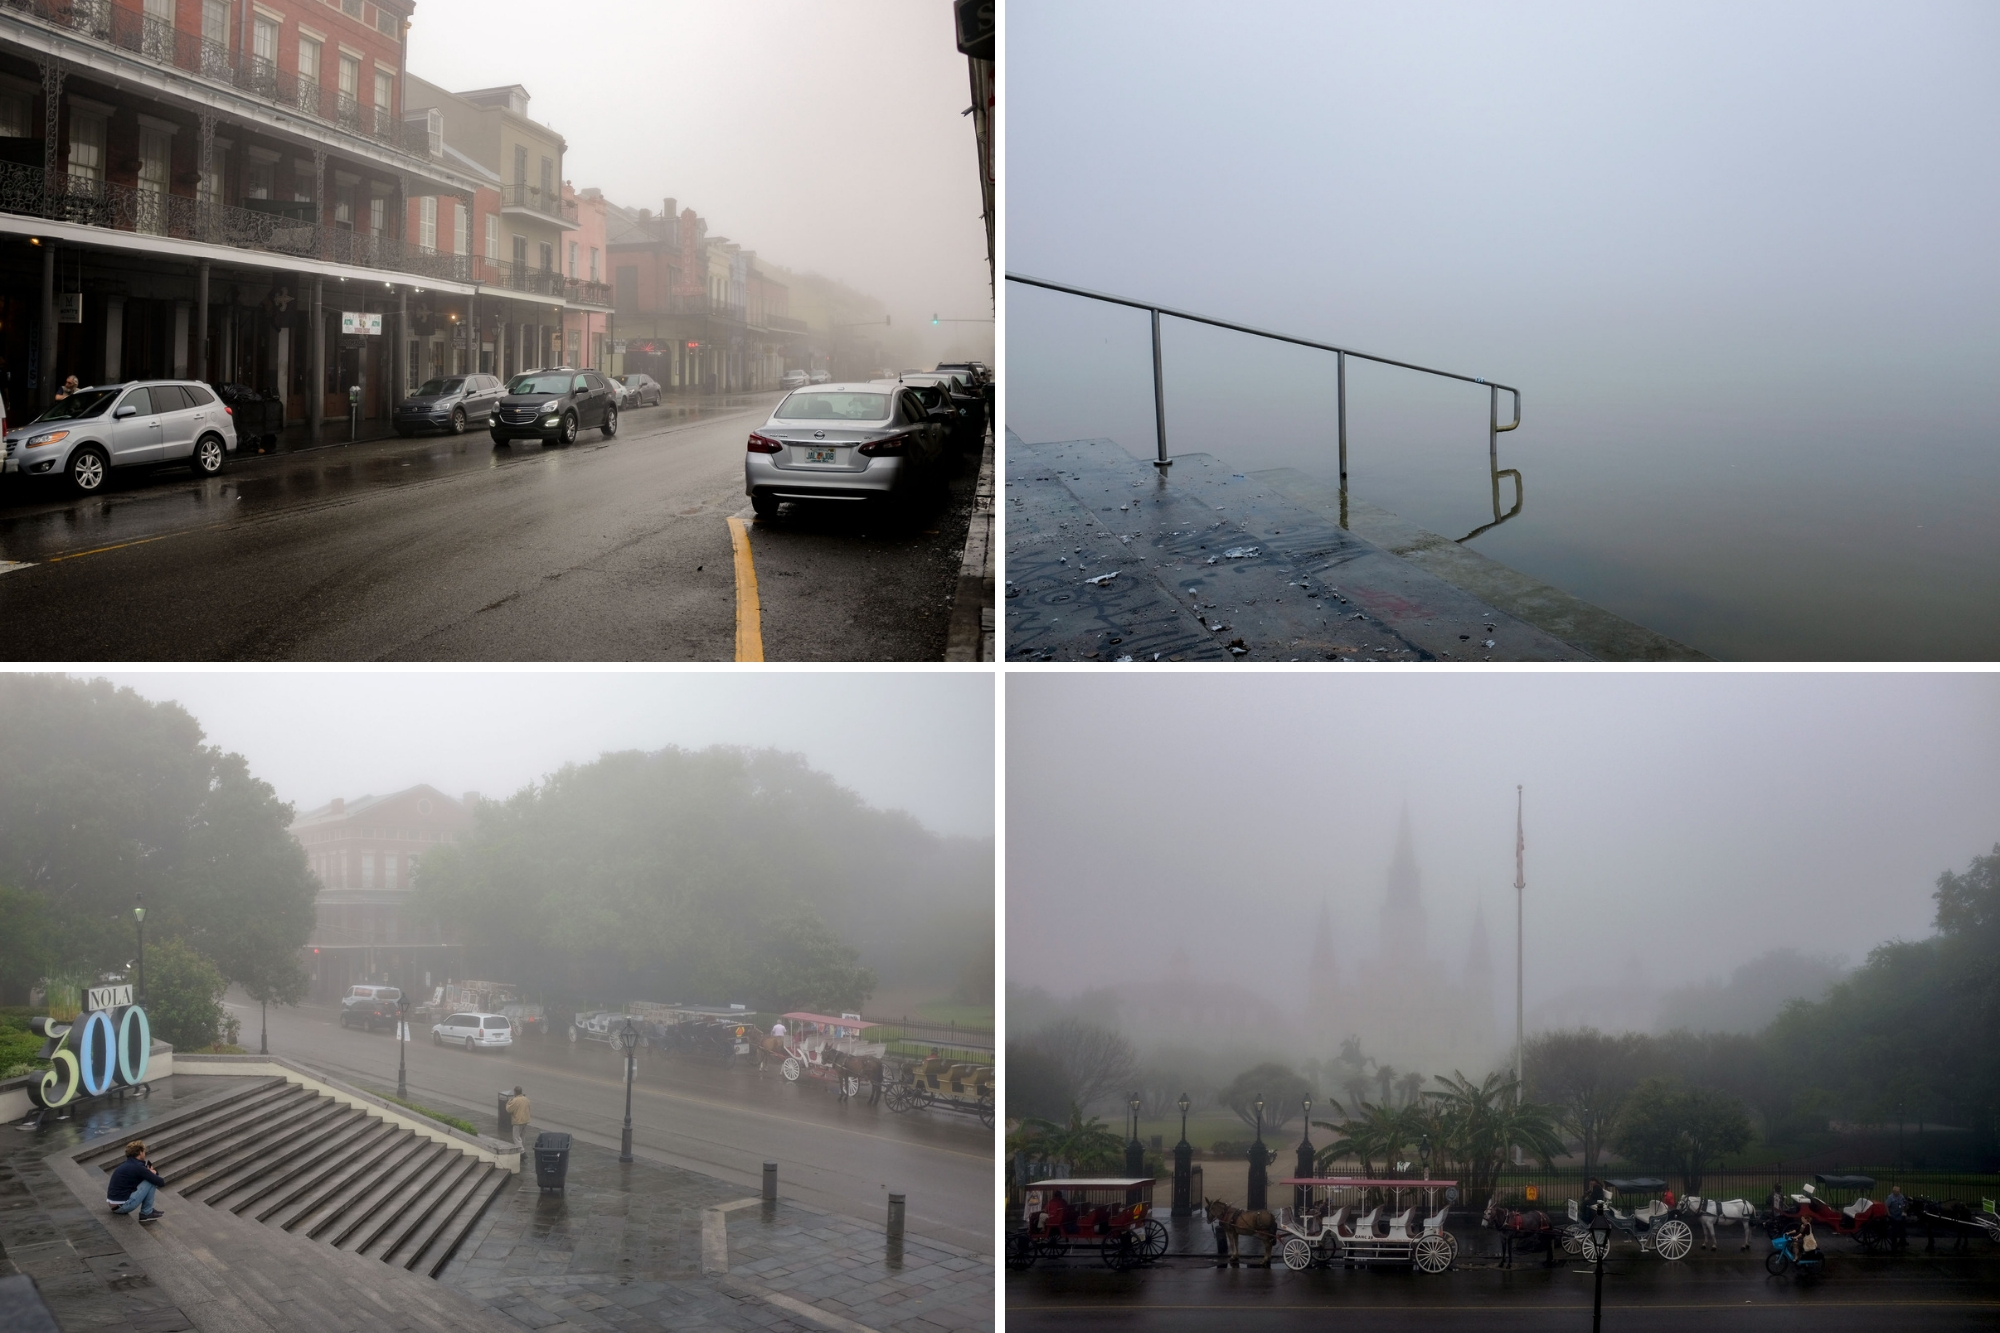 collage: fog over parts of the French Quarter in New Orleans